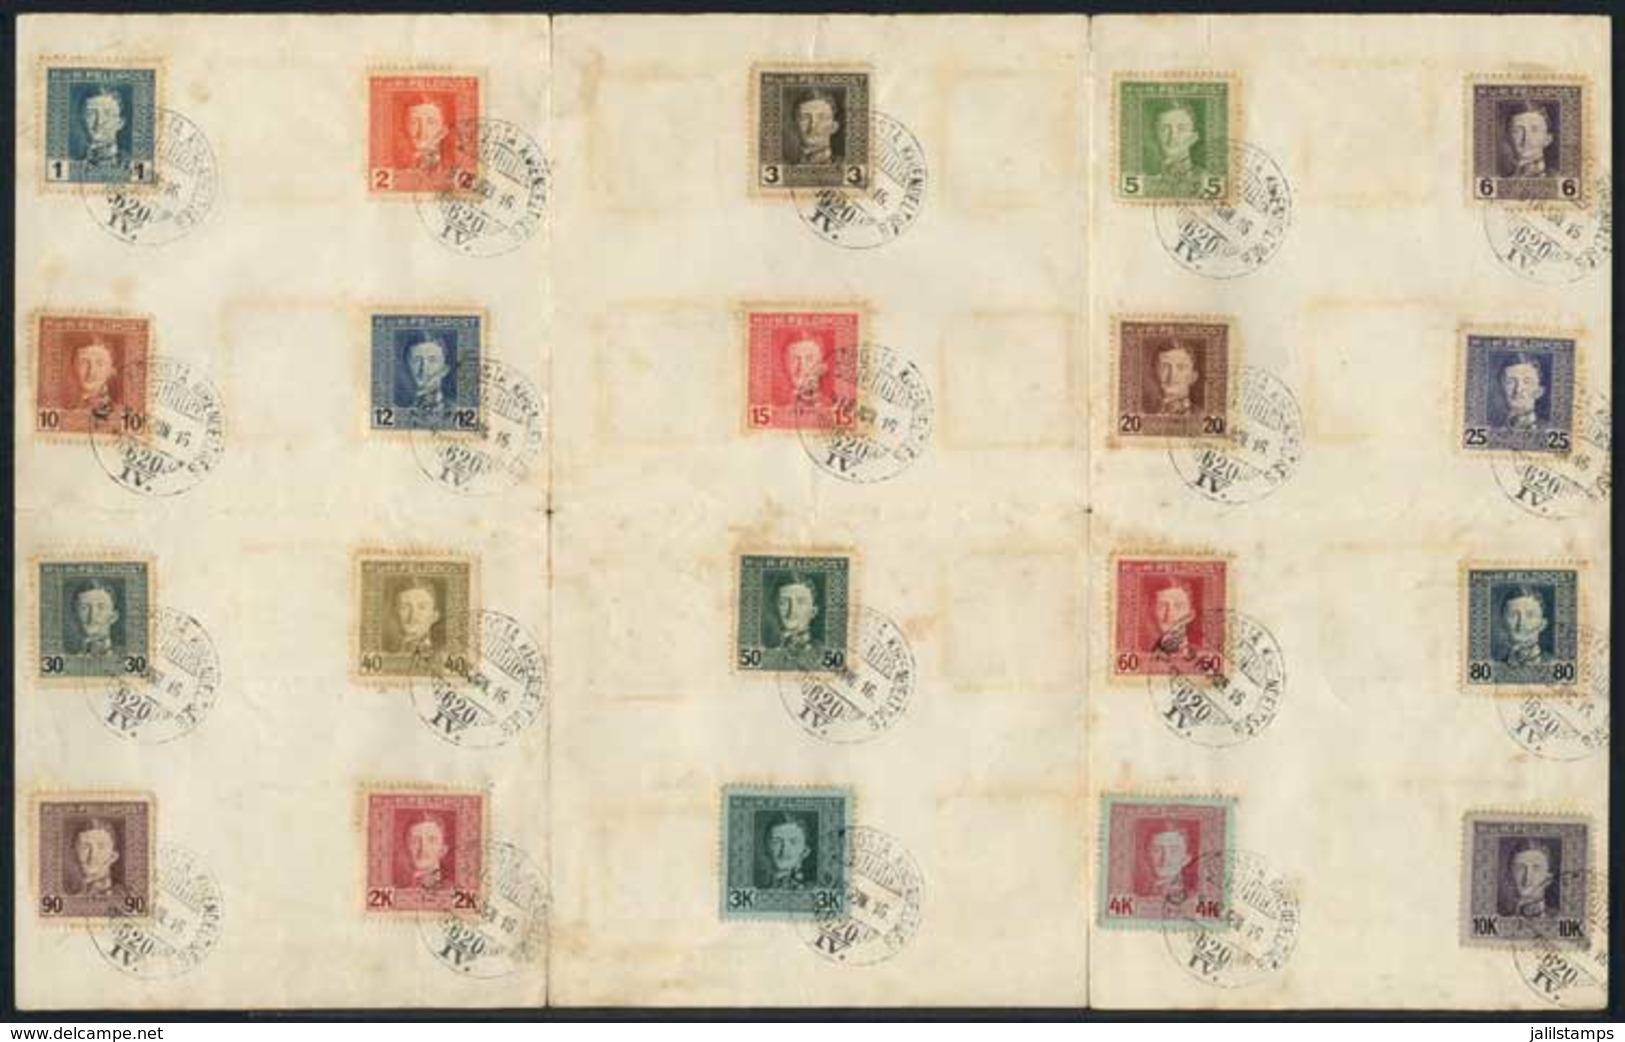 AUSTRIA-HUNGARY: Sc.M49/68, Complete Set Of 20 Values On A Sheet With Cancel Of 16/JUN/1918, Fine Quality, Interesting! - Used Stamps